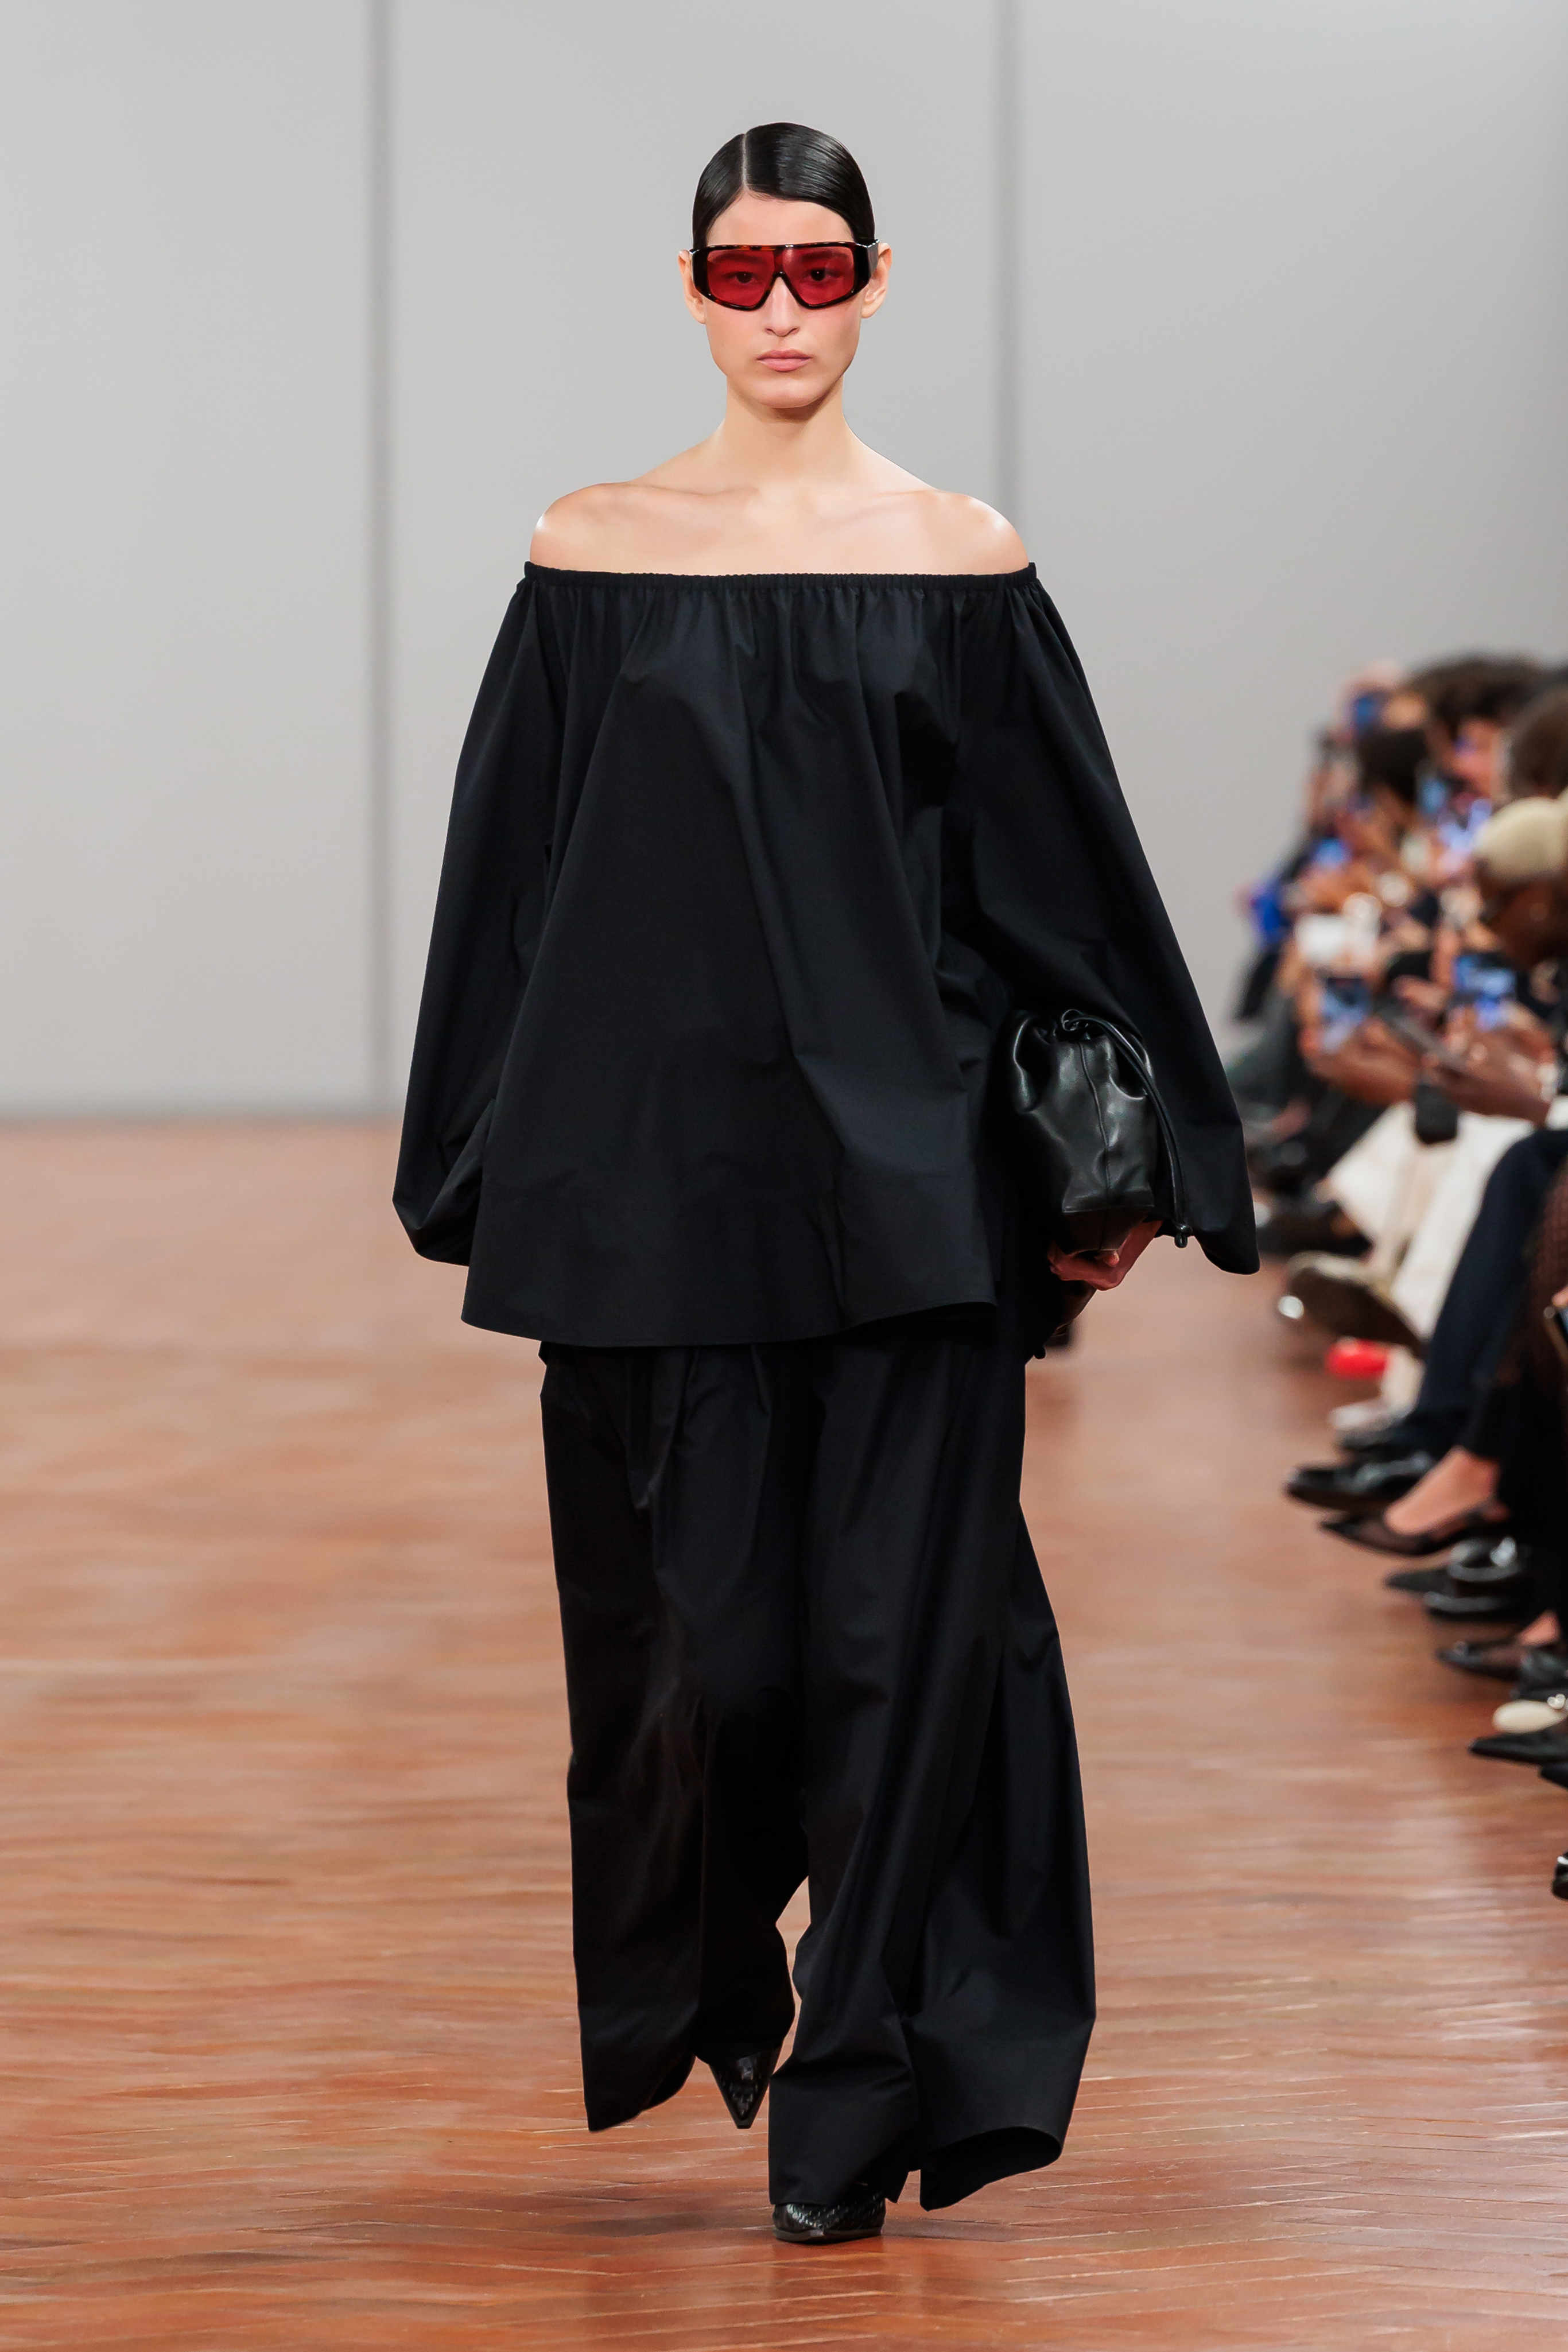 Model on runway wearing an off-shoulder black top, wide-legged pants, carrying a bag, and sporting large sunglasses